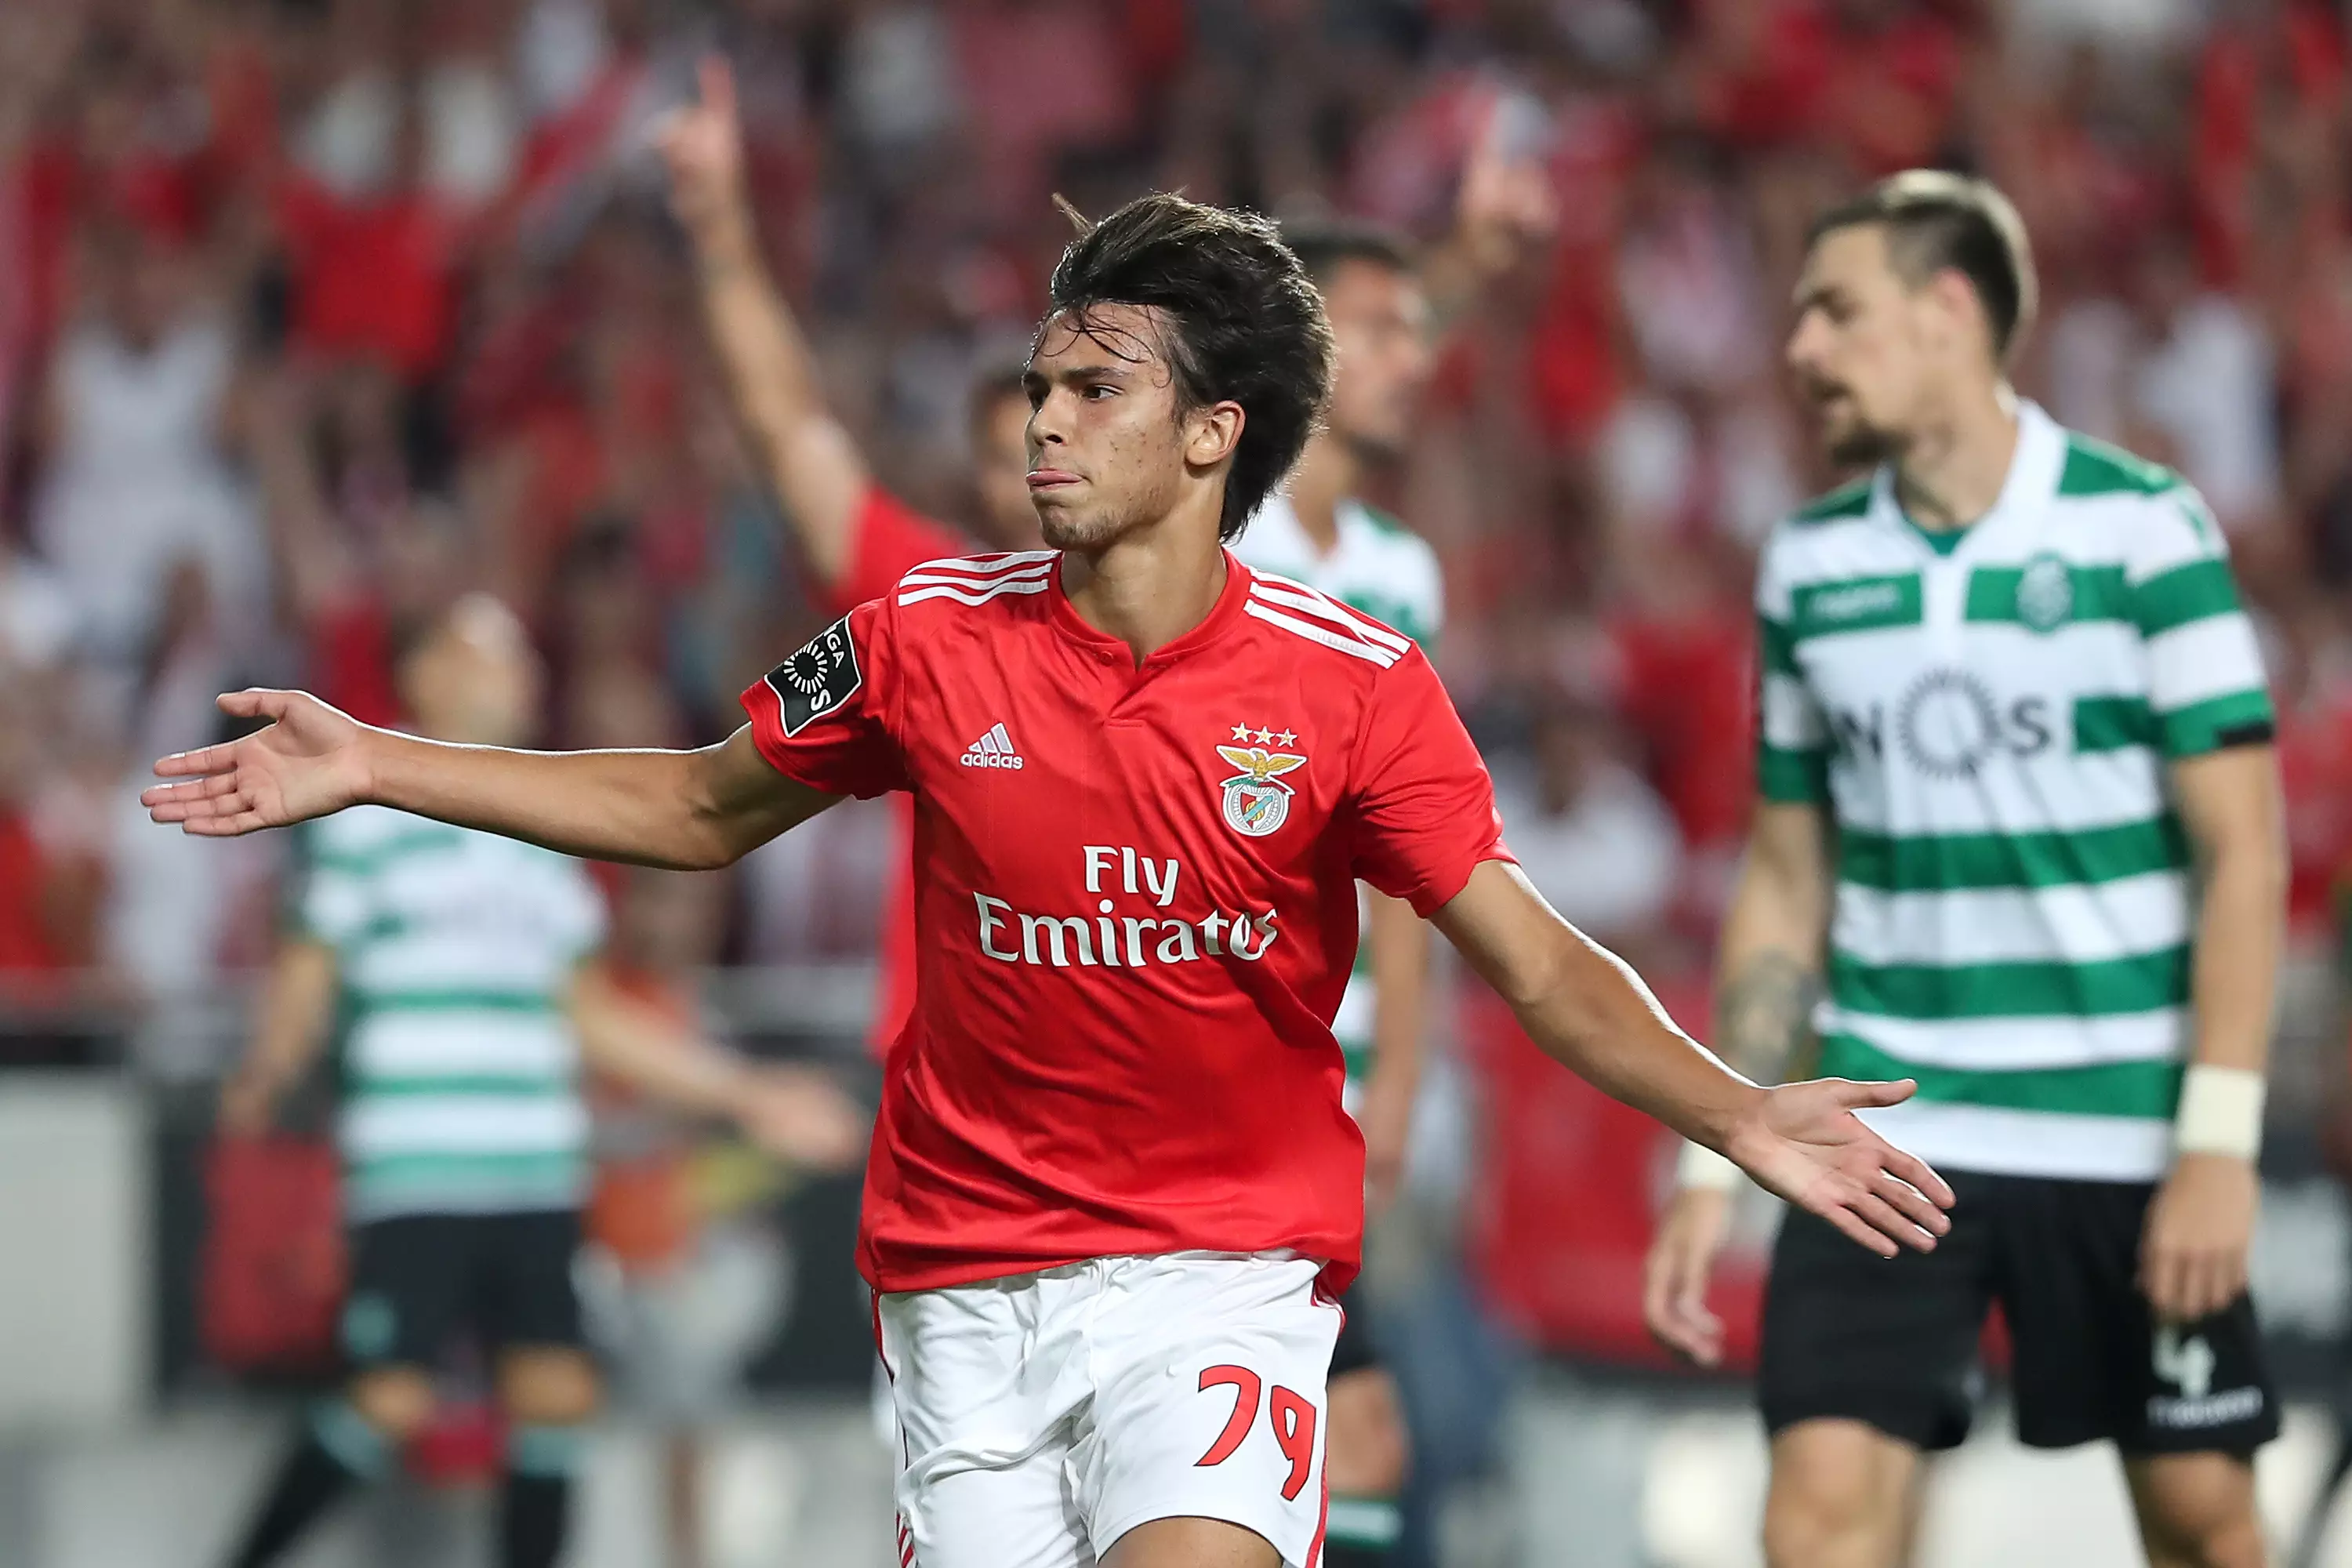 Felix celebrates his goal against Sporting. Image: PA Images